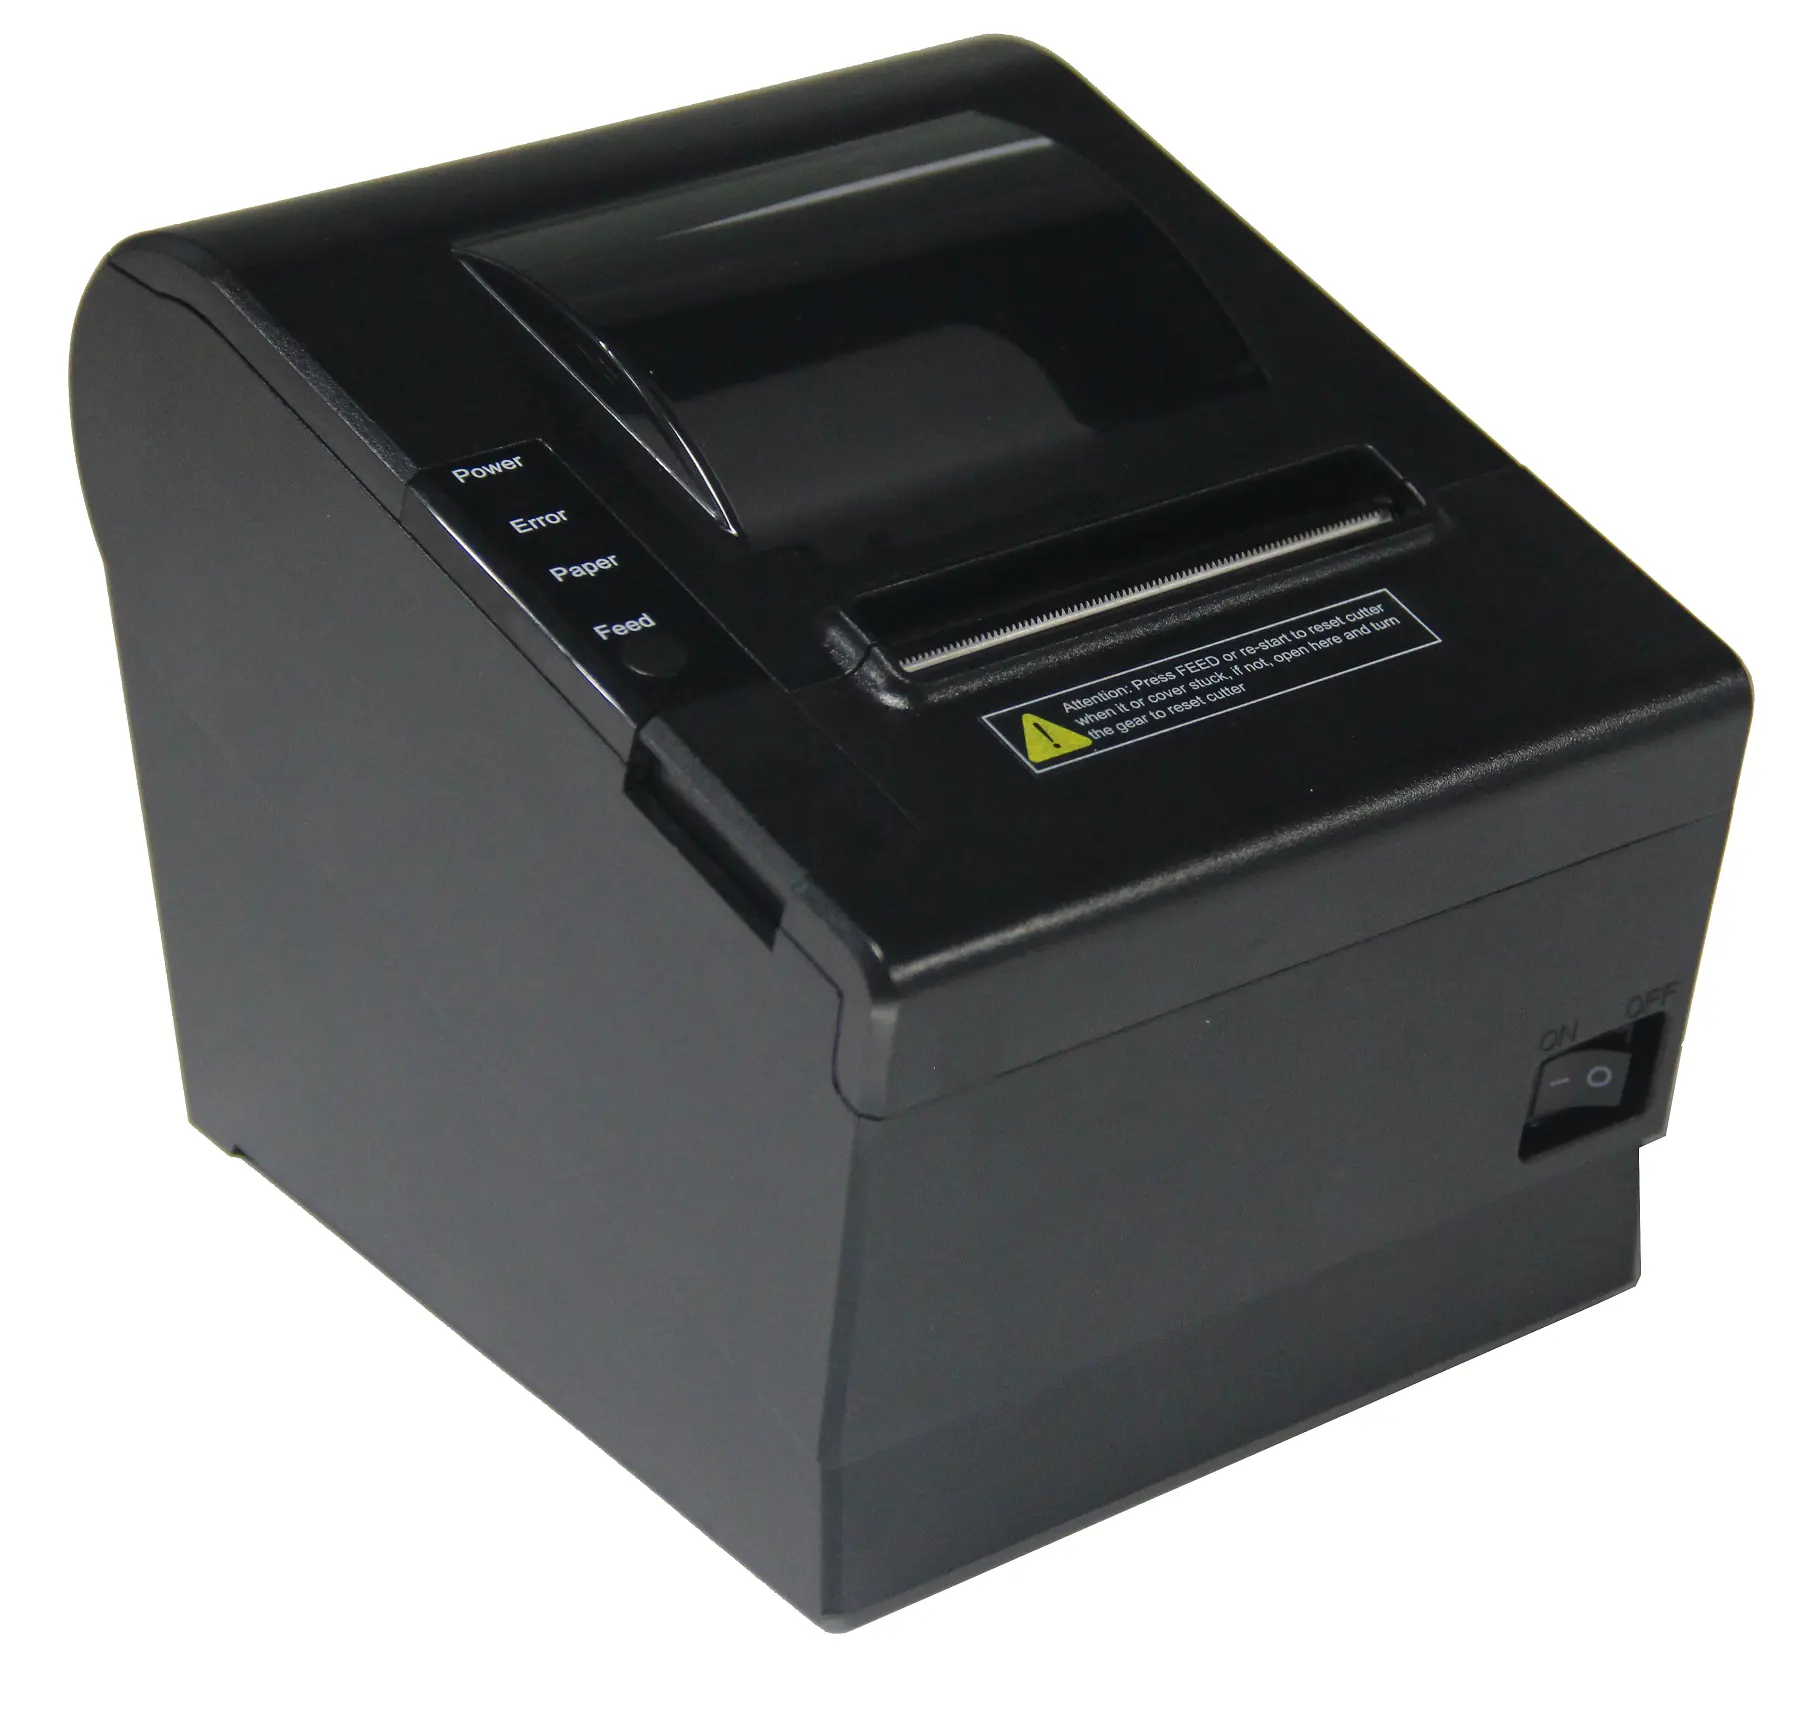 Restaurant Food Order auto cutter 80mm thermal Printer with alarm